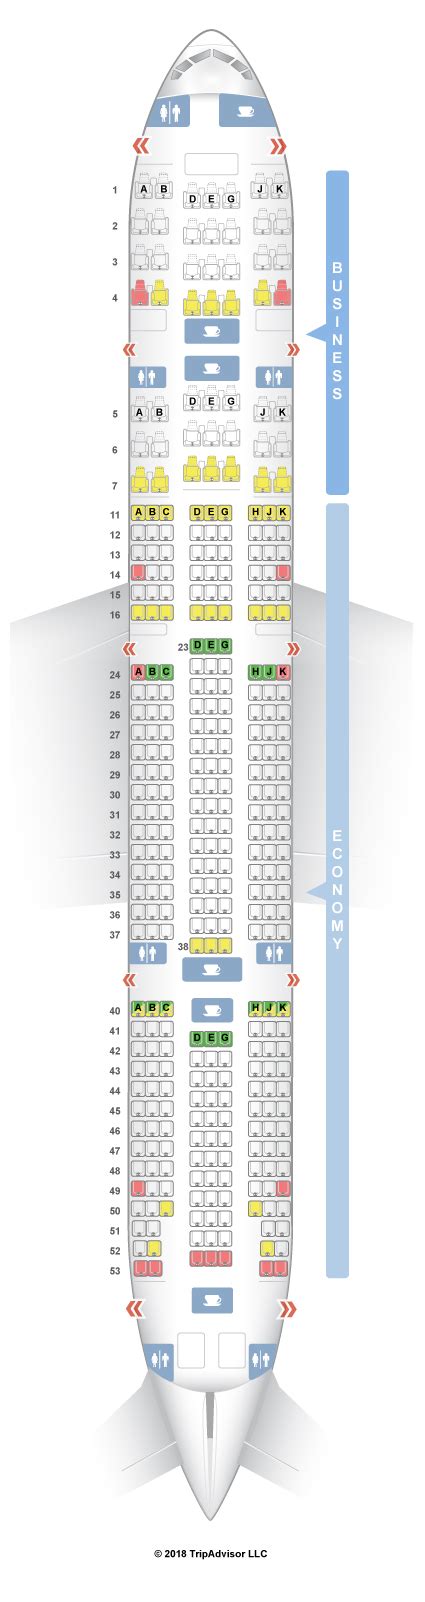 turkish airlines seat map 777-300